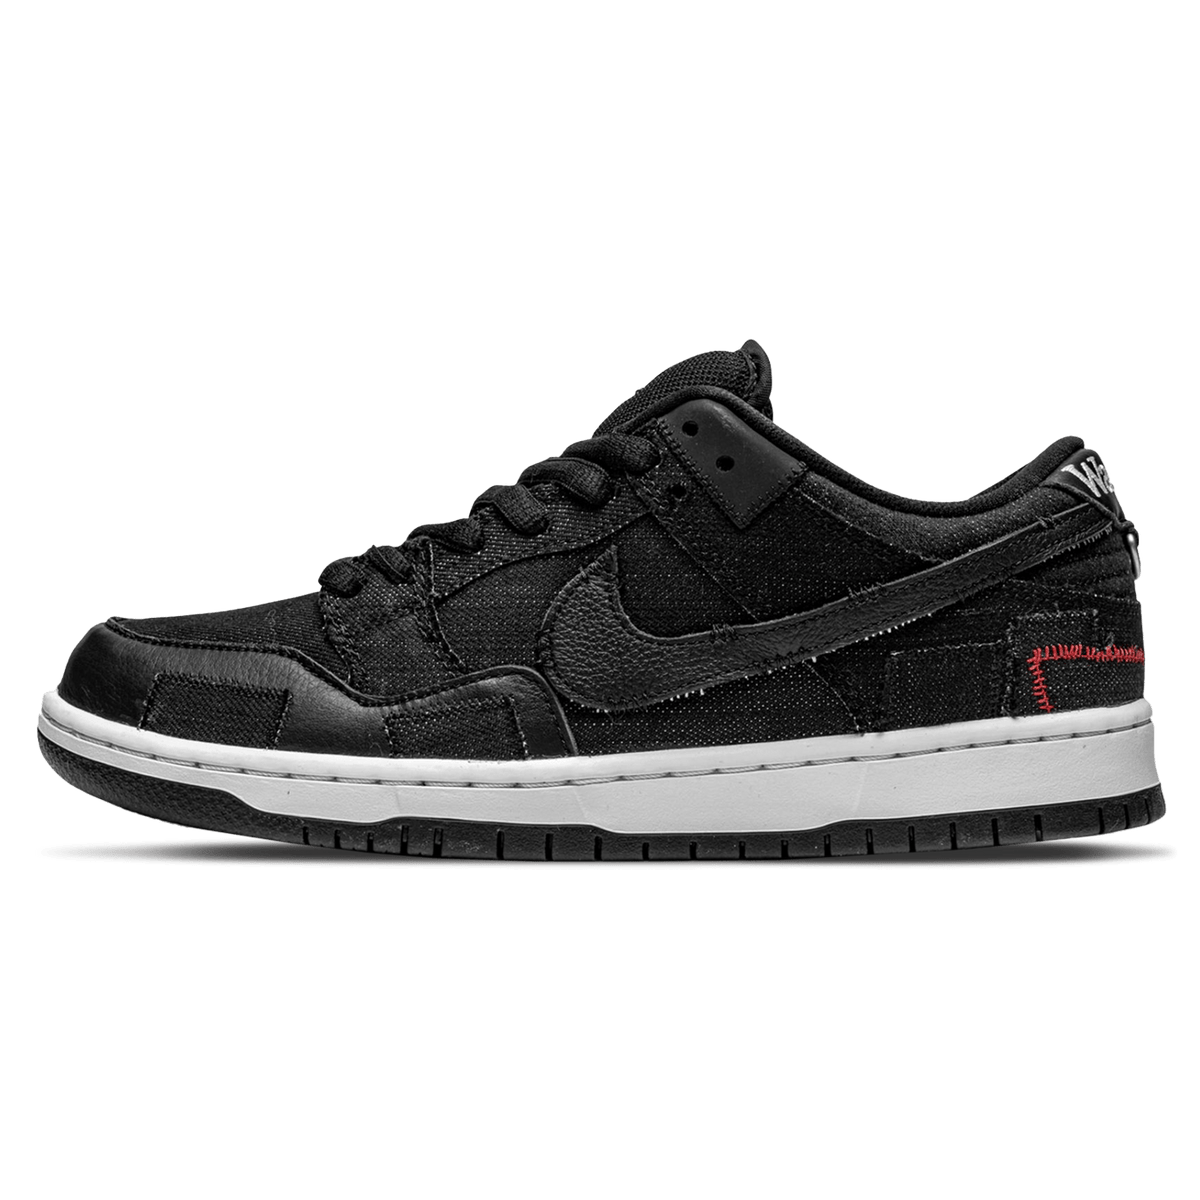 nike skeleton sb dunk low wasted youth DD8386 001 1